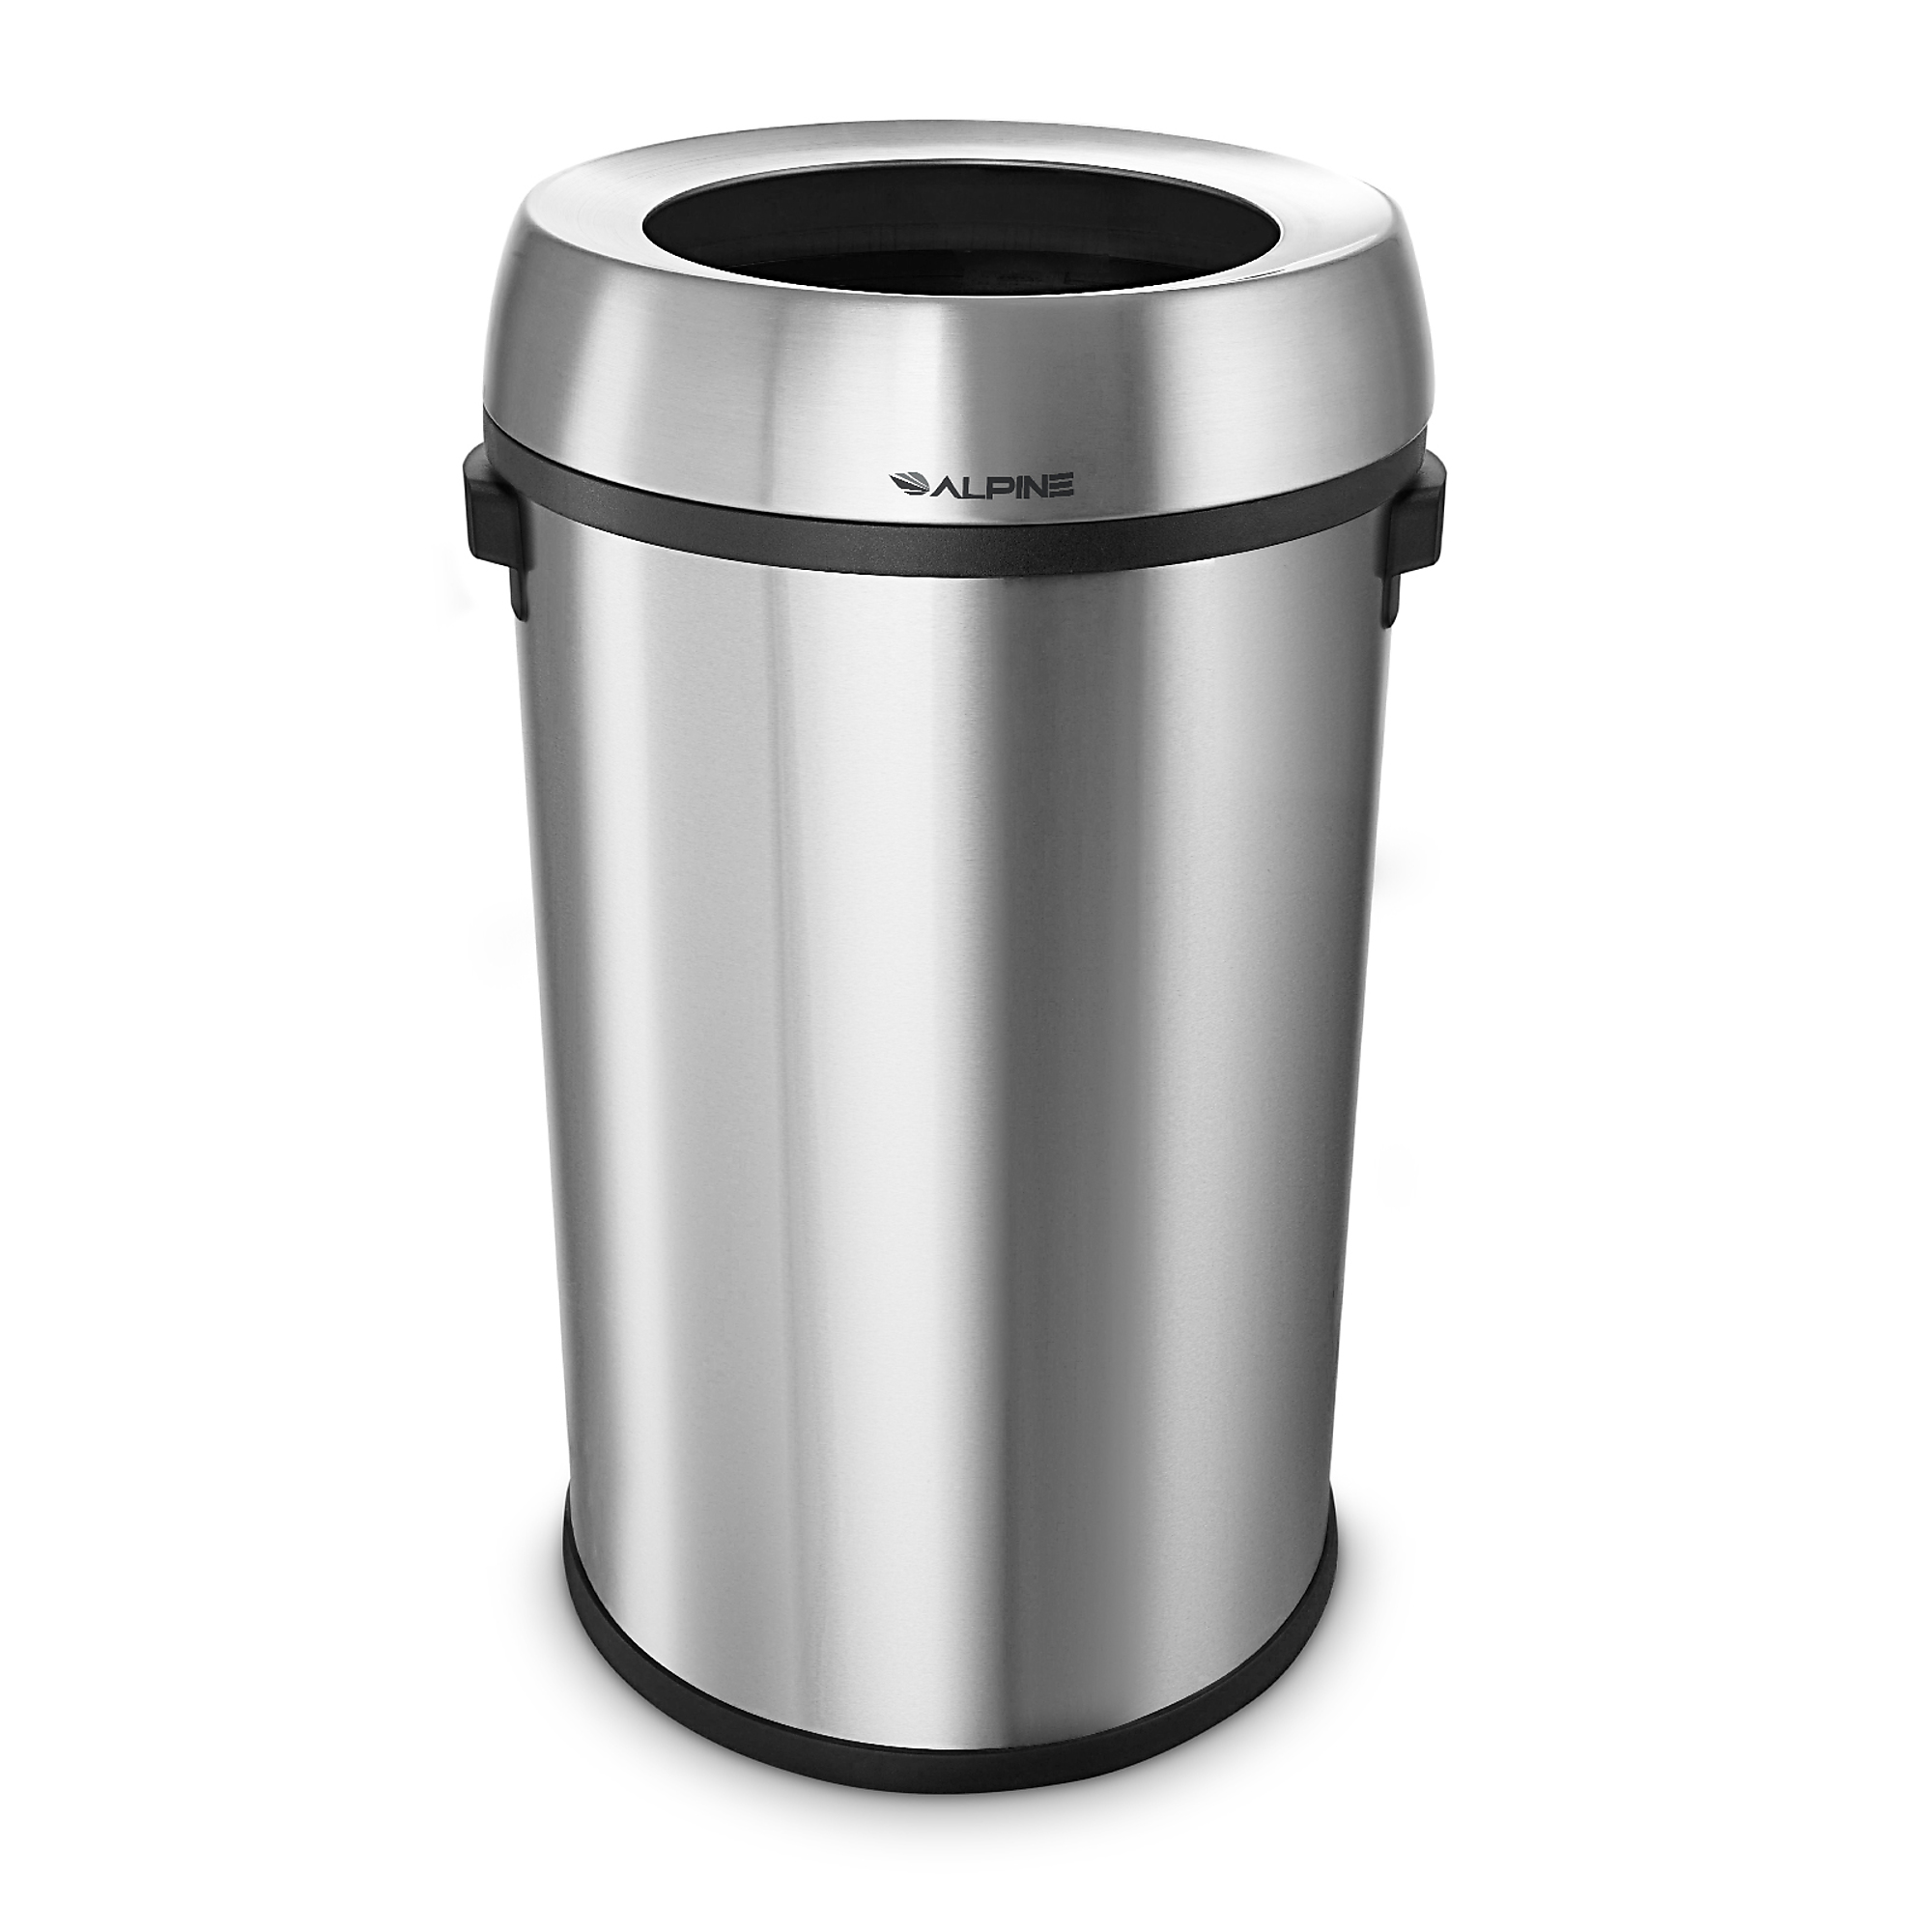 Alpine, 17-gallon Stainless Steel Open Top Trash Can, Capacity 17 Gal, Model ALP470-65L